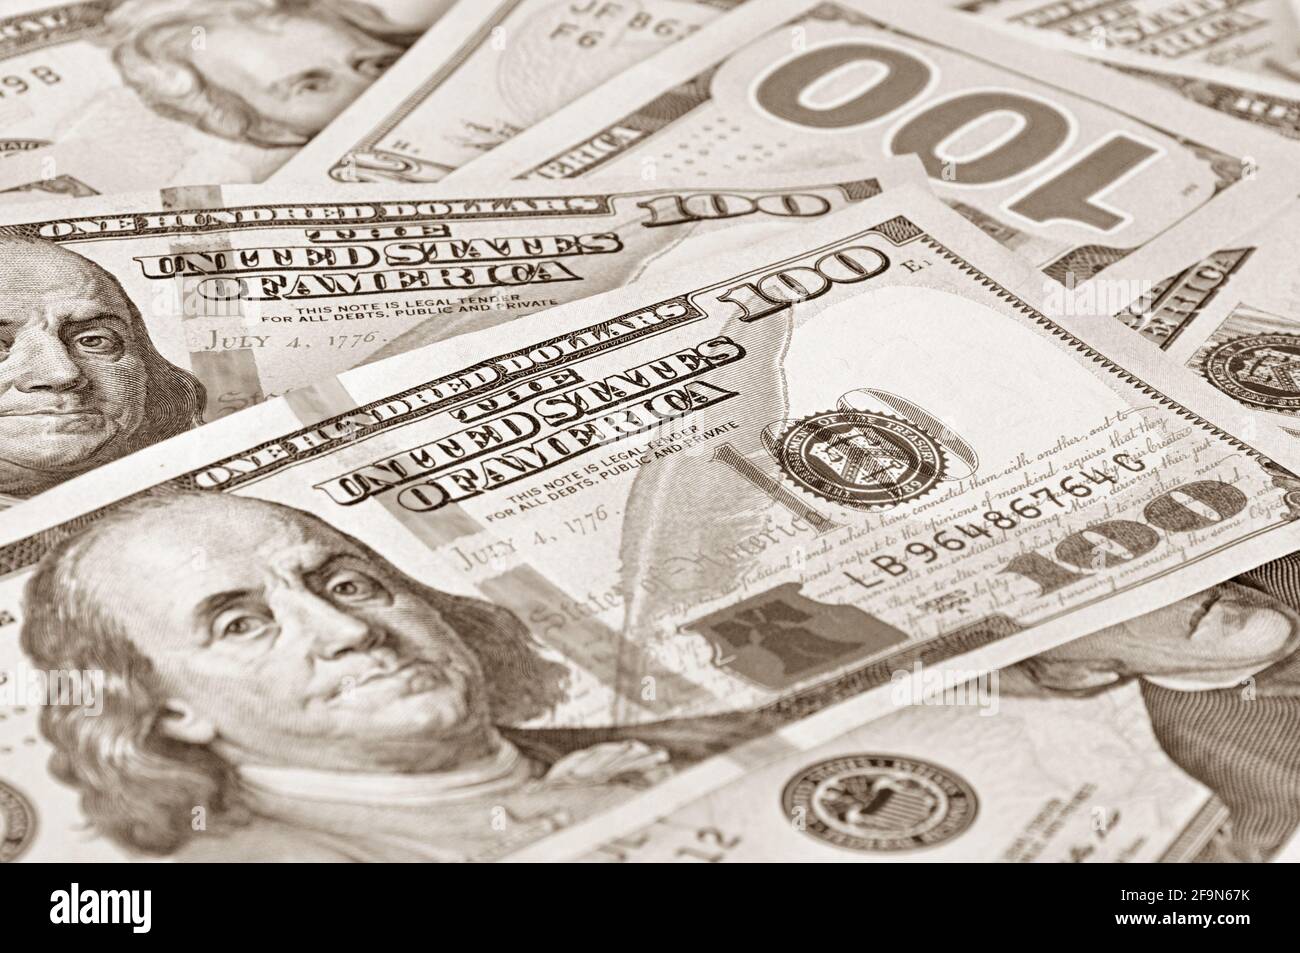 Money - 100 United States dollars (USD) bills - focusing on words THE UNITED STATES OF AMERICA Stock Photo